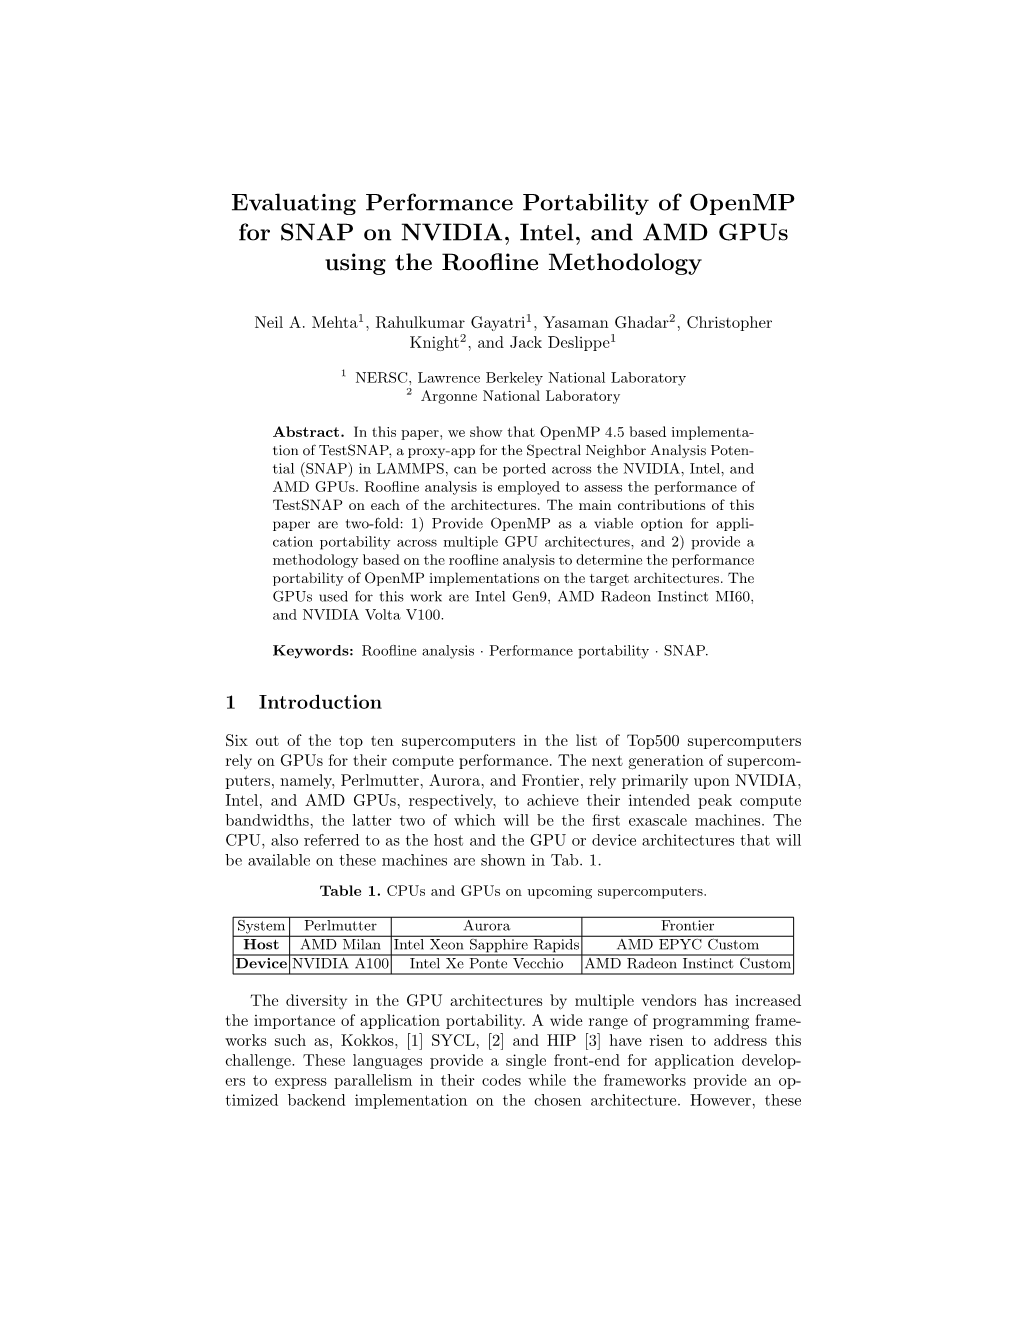 Evaluating Performance Portability of Openmp for SNAP on NVIDIA, Intel, and AMD Gpus Using the Rooﬂine Methodology